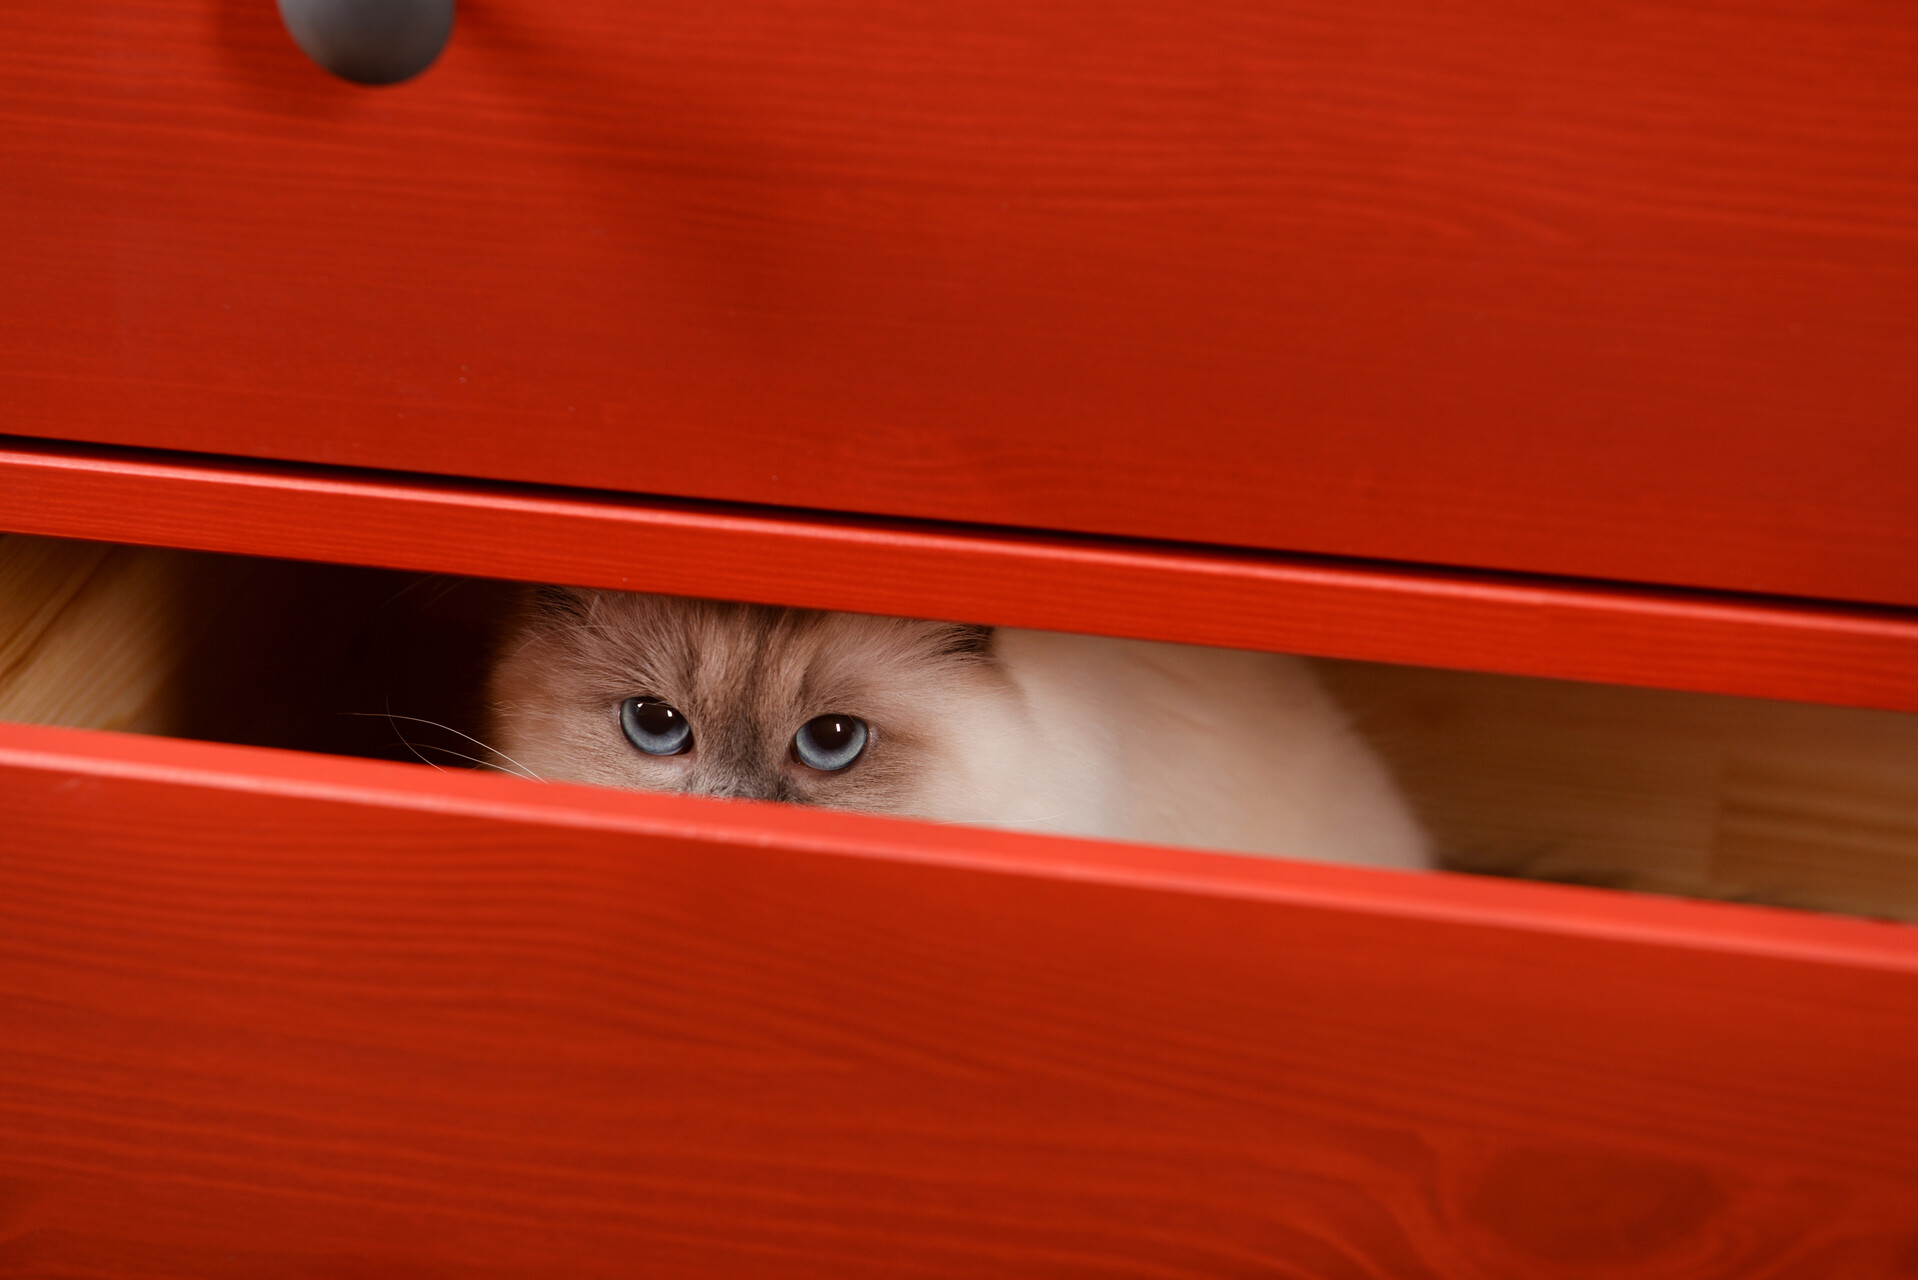 A cat hiding inside a set of red drawers